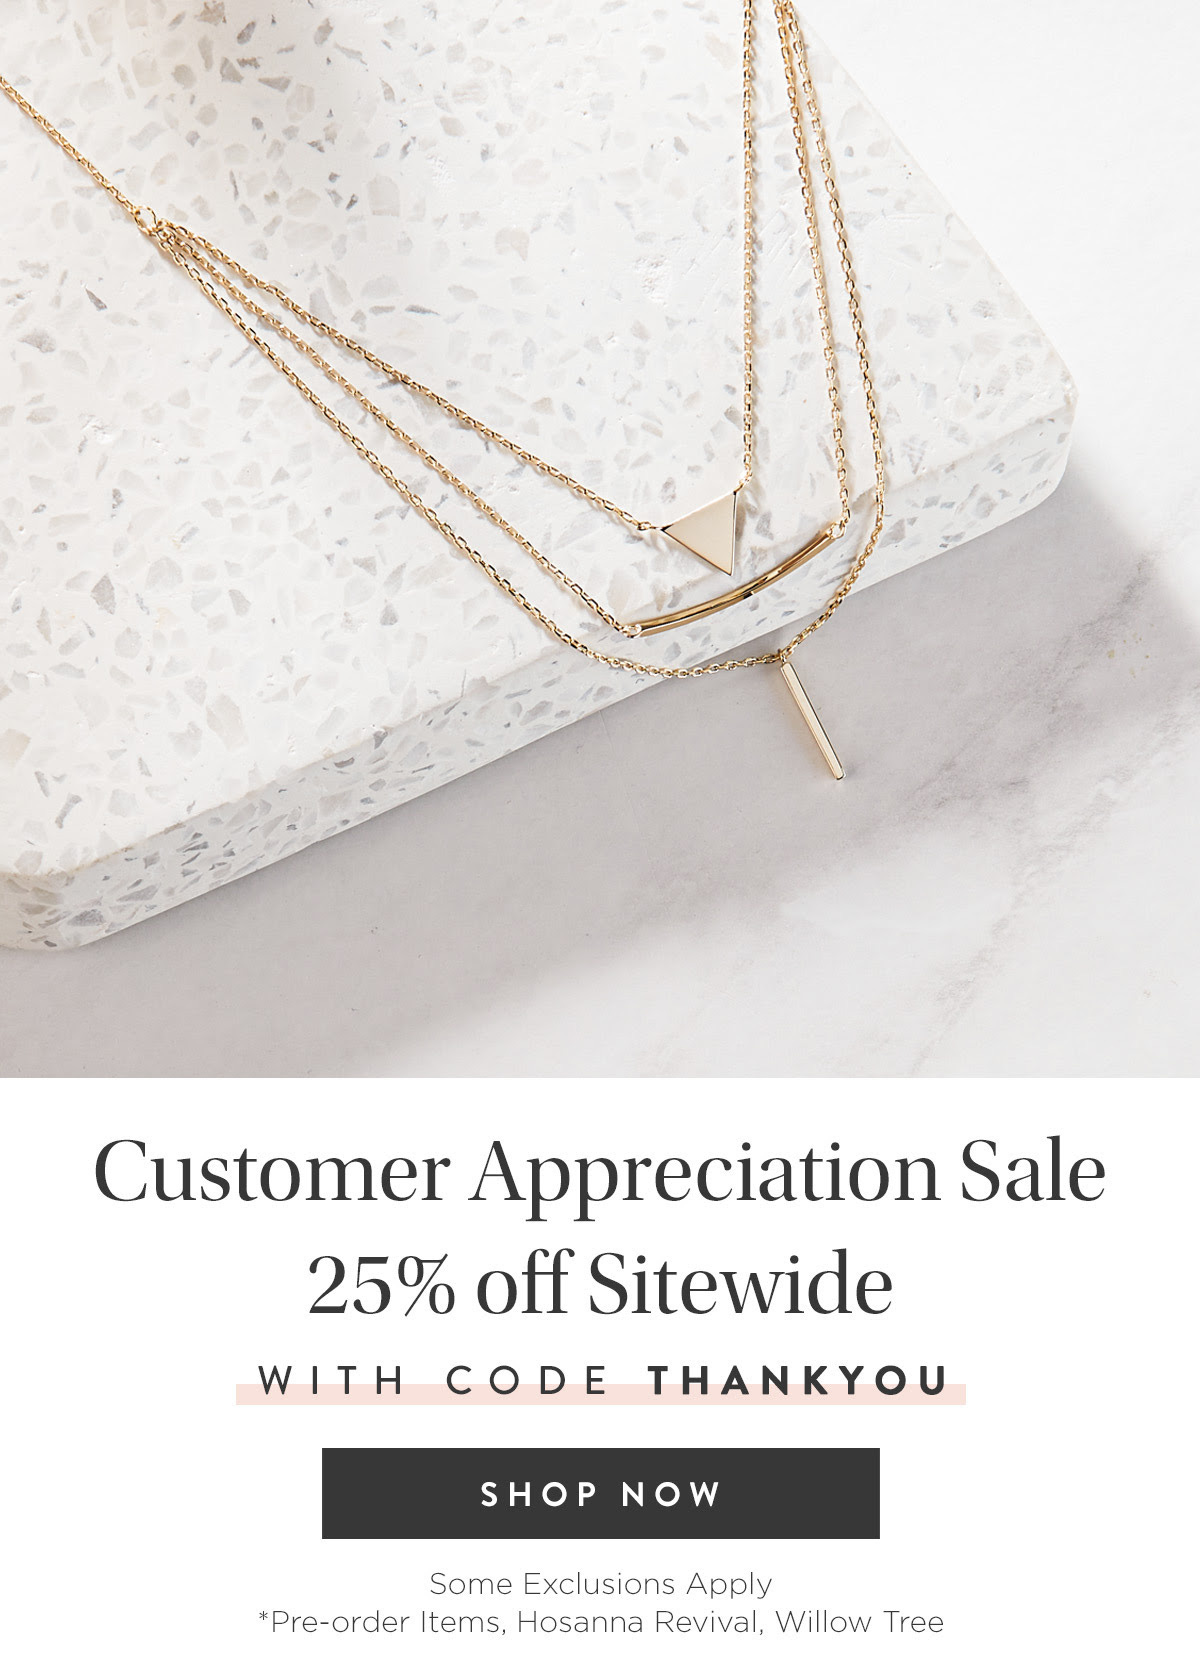 Customer Appreciation Sale - 25% off Sitewide with code THANKYOU - Some Exclusions Apply
DaySpring Hope & Encouragement Bible Pre-order, Hosanna Revival, Willow Tree
> Shop Now